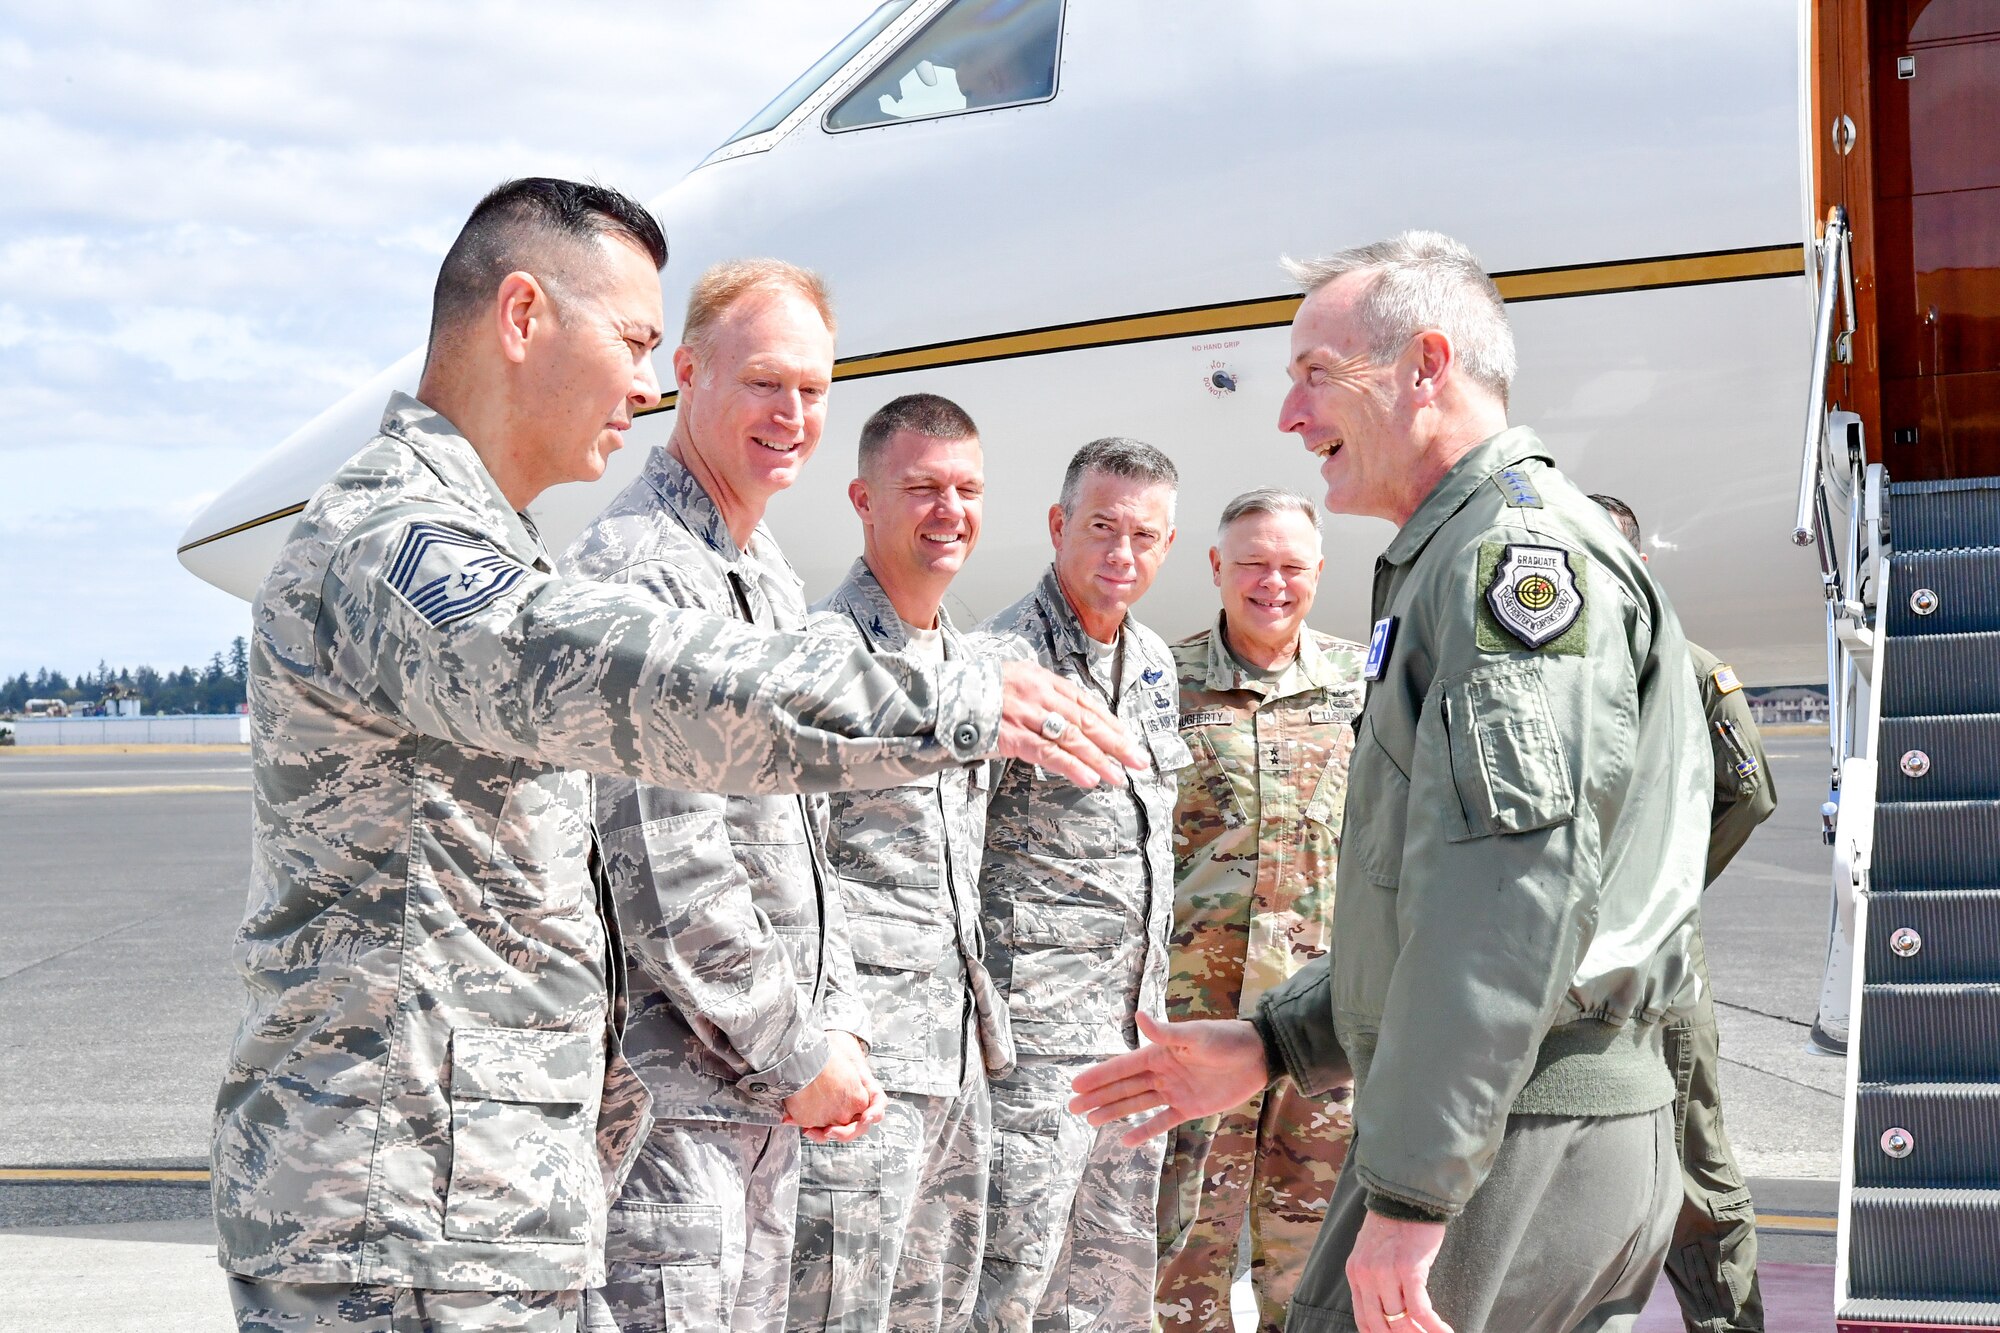 Chief Master Sgt. Allan Lawson, Western Air Defense Sector Senior Enlisted Leader, greets Gen. Terrence O'Shaughnessy, NORAD and USNORTHCOM commander, as he arrives to Joint Base Lewis-McChord, Washington Aug. 23, 2018.  O'Shaughnessy met with the Western Air Defense Sector operations crew that provided command and control of the 142nd Fighter Wing's F-15 intercept of the Aug. 10 stolen Horizon Bombardier Q400 aircraft out of SeaTac International Airport.  Also pictured from left to right are Col. Gregory Lewis, WADS commander, Col. Scovill Currin, 62nd Airlift Wing Commander,  Brig. Gen. Jeremy Horn, Washington Air National Guard Commander, and Maj. Gen. Bret Daugherty, The Adjutant General, Washington. (U.S. Air National Guard photo by Maj. Kimberly D. Burke)